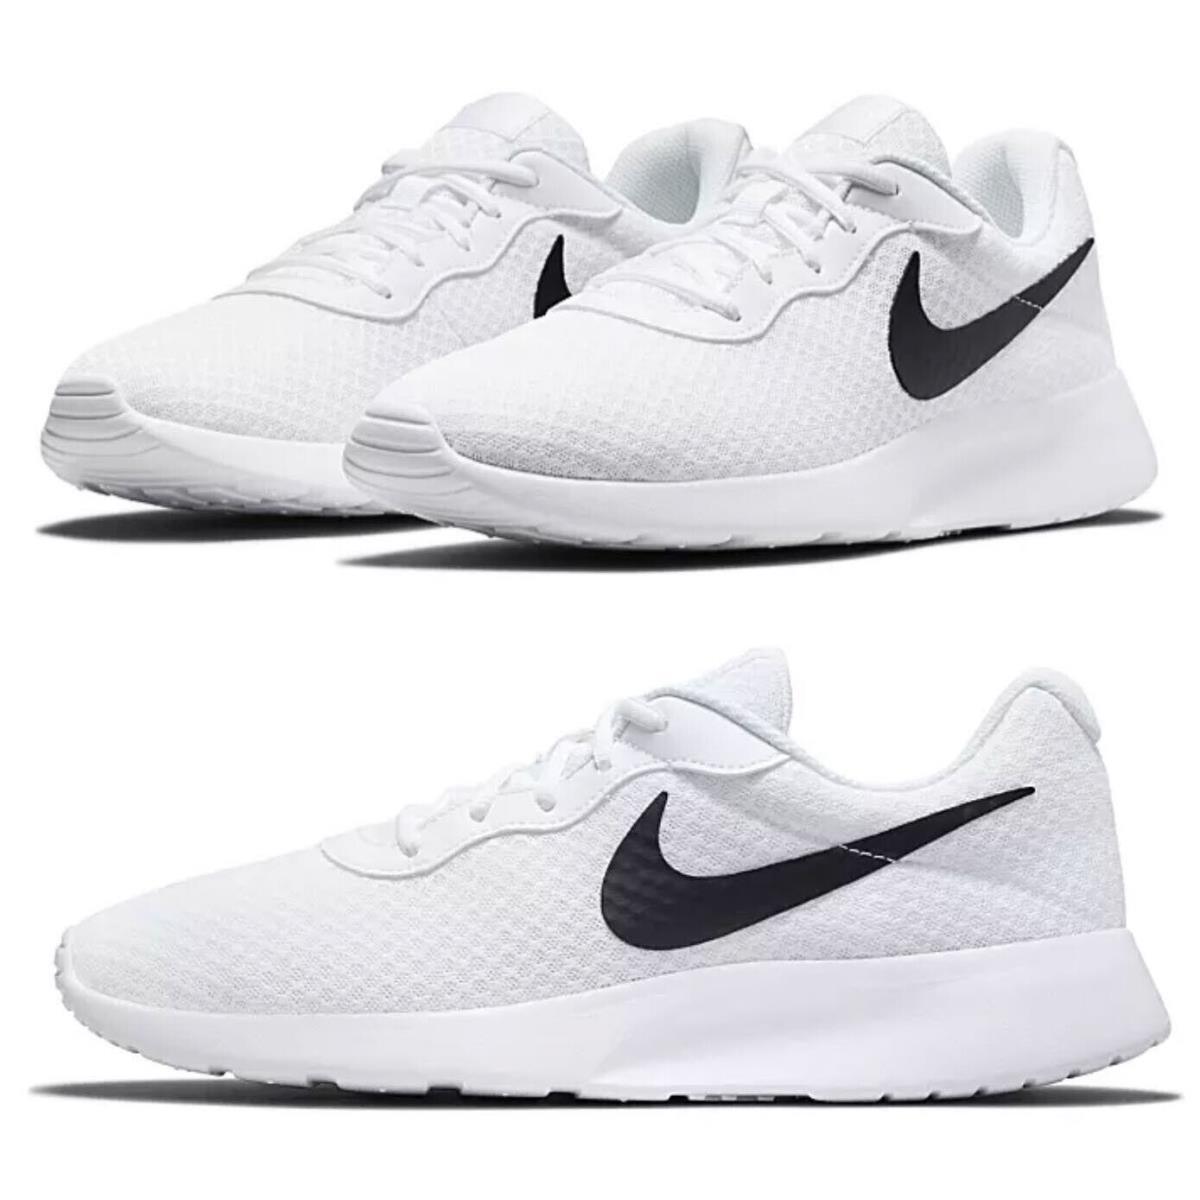 Nike Tanjun Athletic Sneakers Casual Shoes Work Mens White Black All Sizes - White